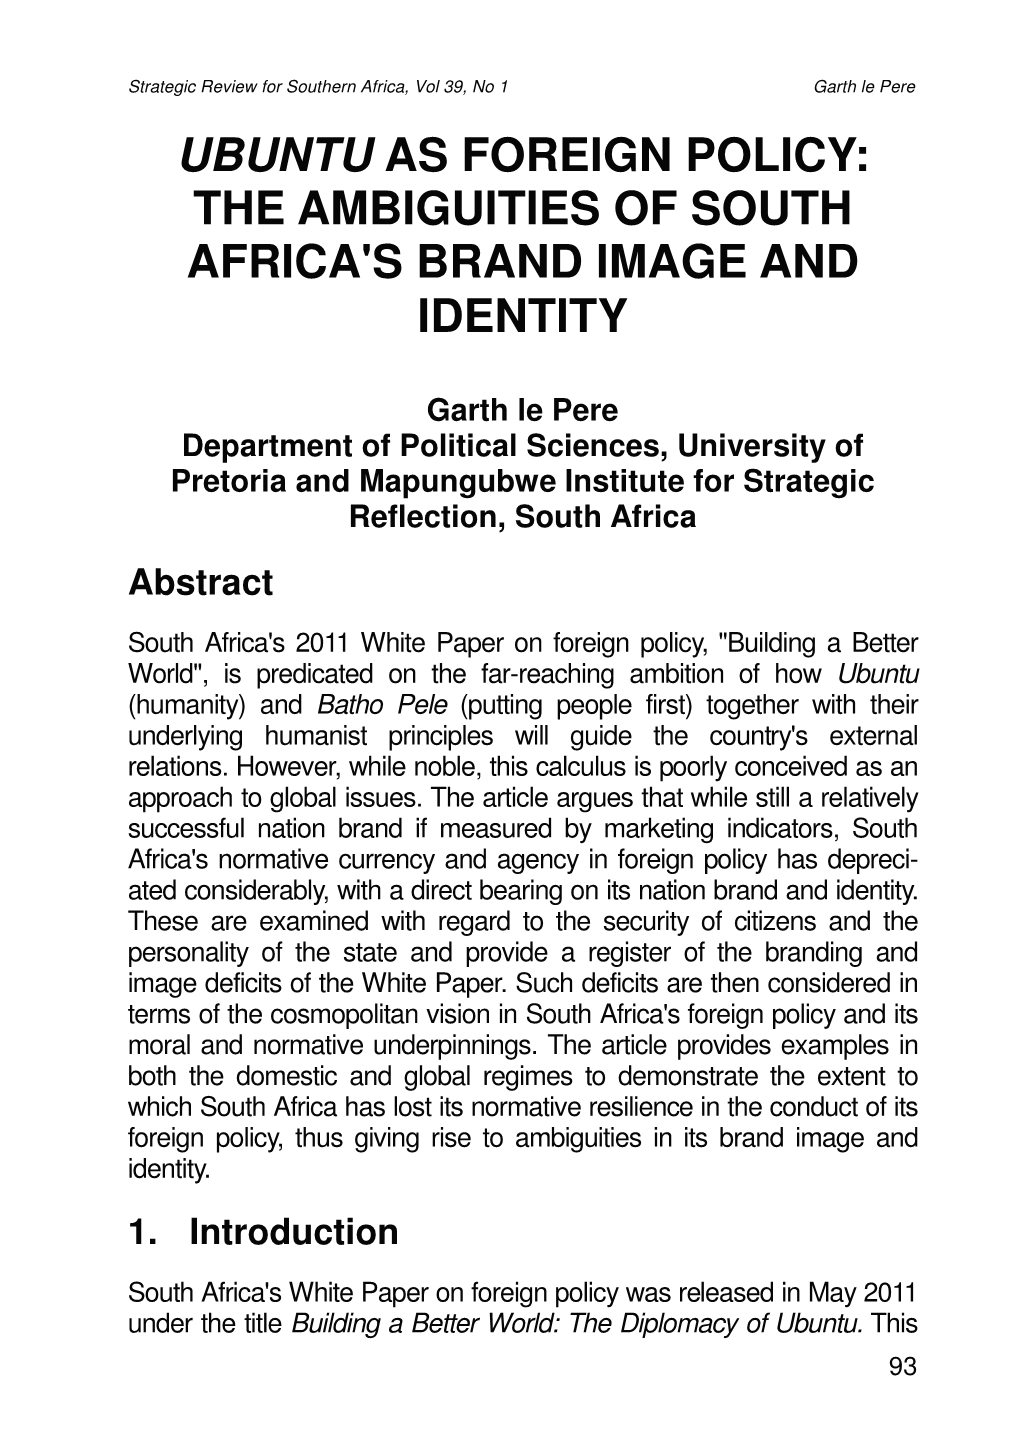 Ubuntu As Foreign Policy: the Ambiguities of South Africa's Brand Image and Identity